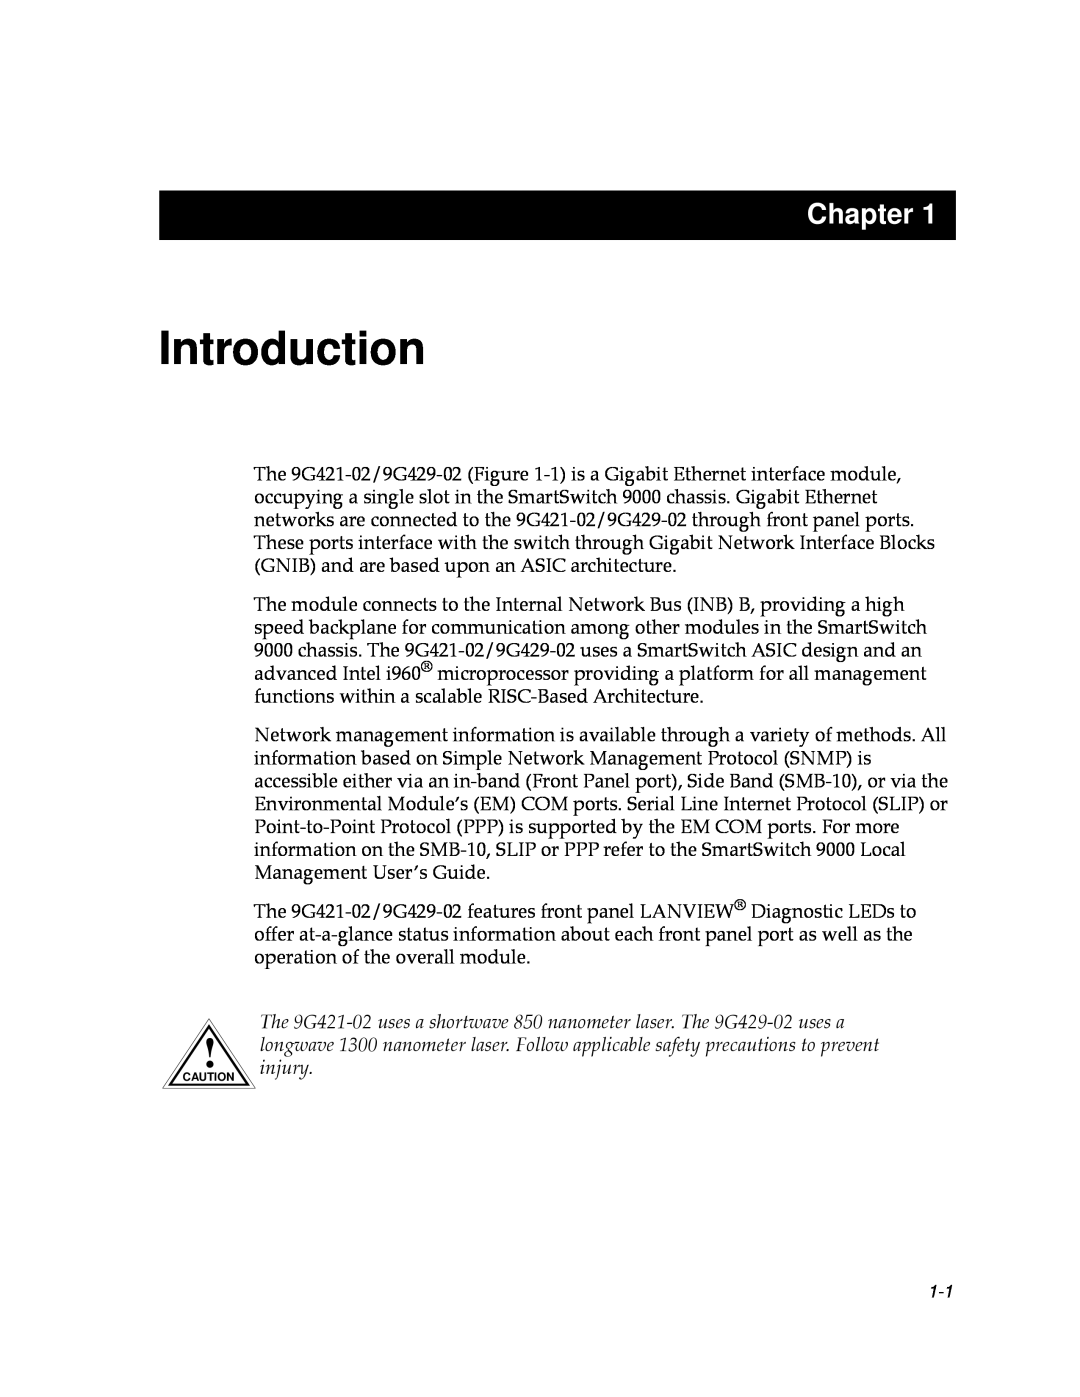 Cabletron Systems 9000 manual Introduction, Chapter 